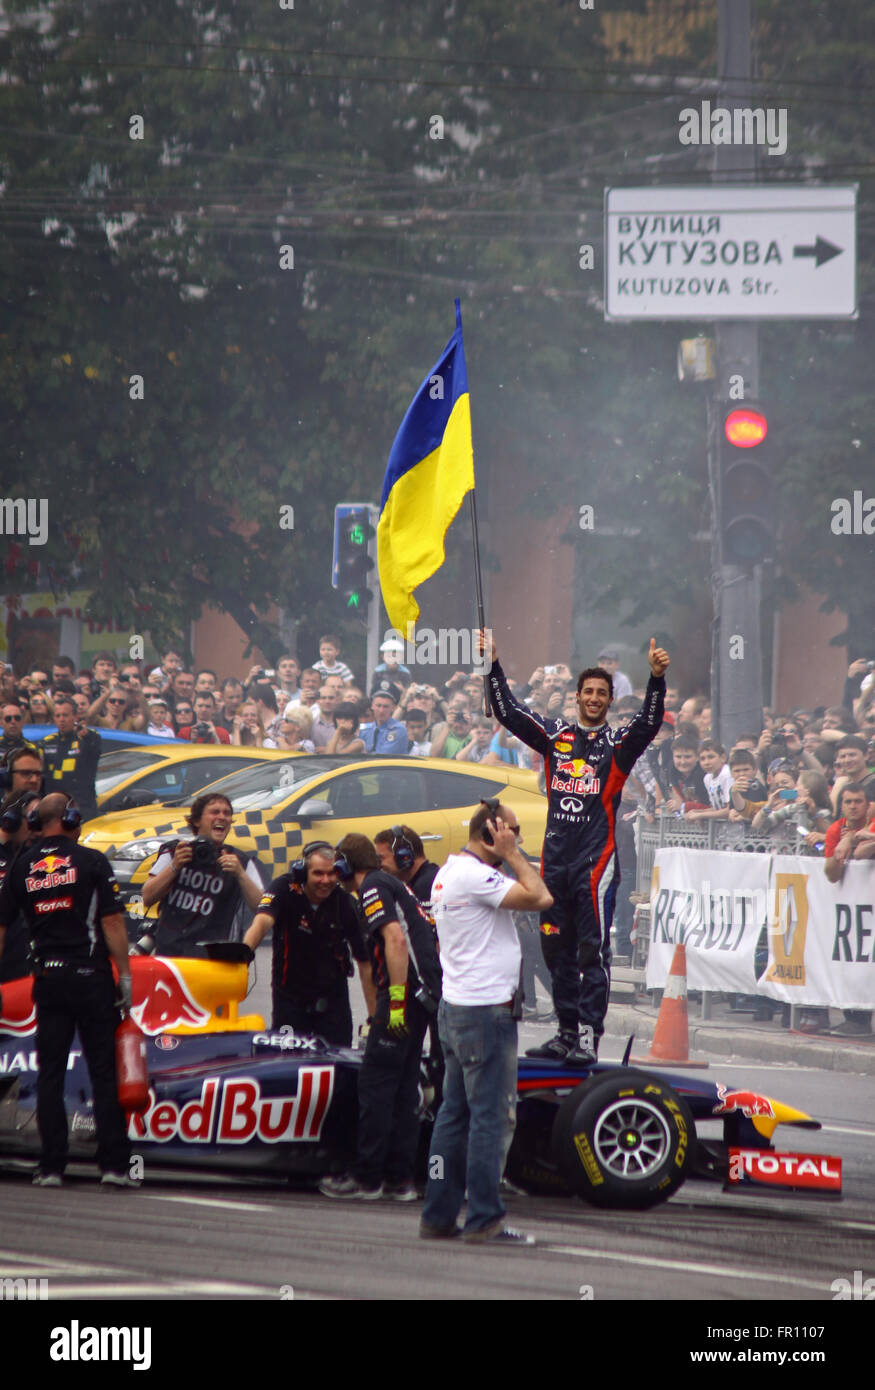 KYIV, UKRAINE - MAY 19, 2012: Driver Daniel Ricciardo of Red Bull Racing Team looks on during Red Bull Champions Parade on the s Stock Photo